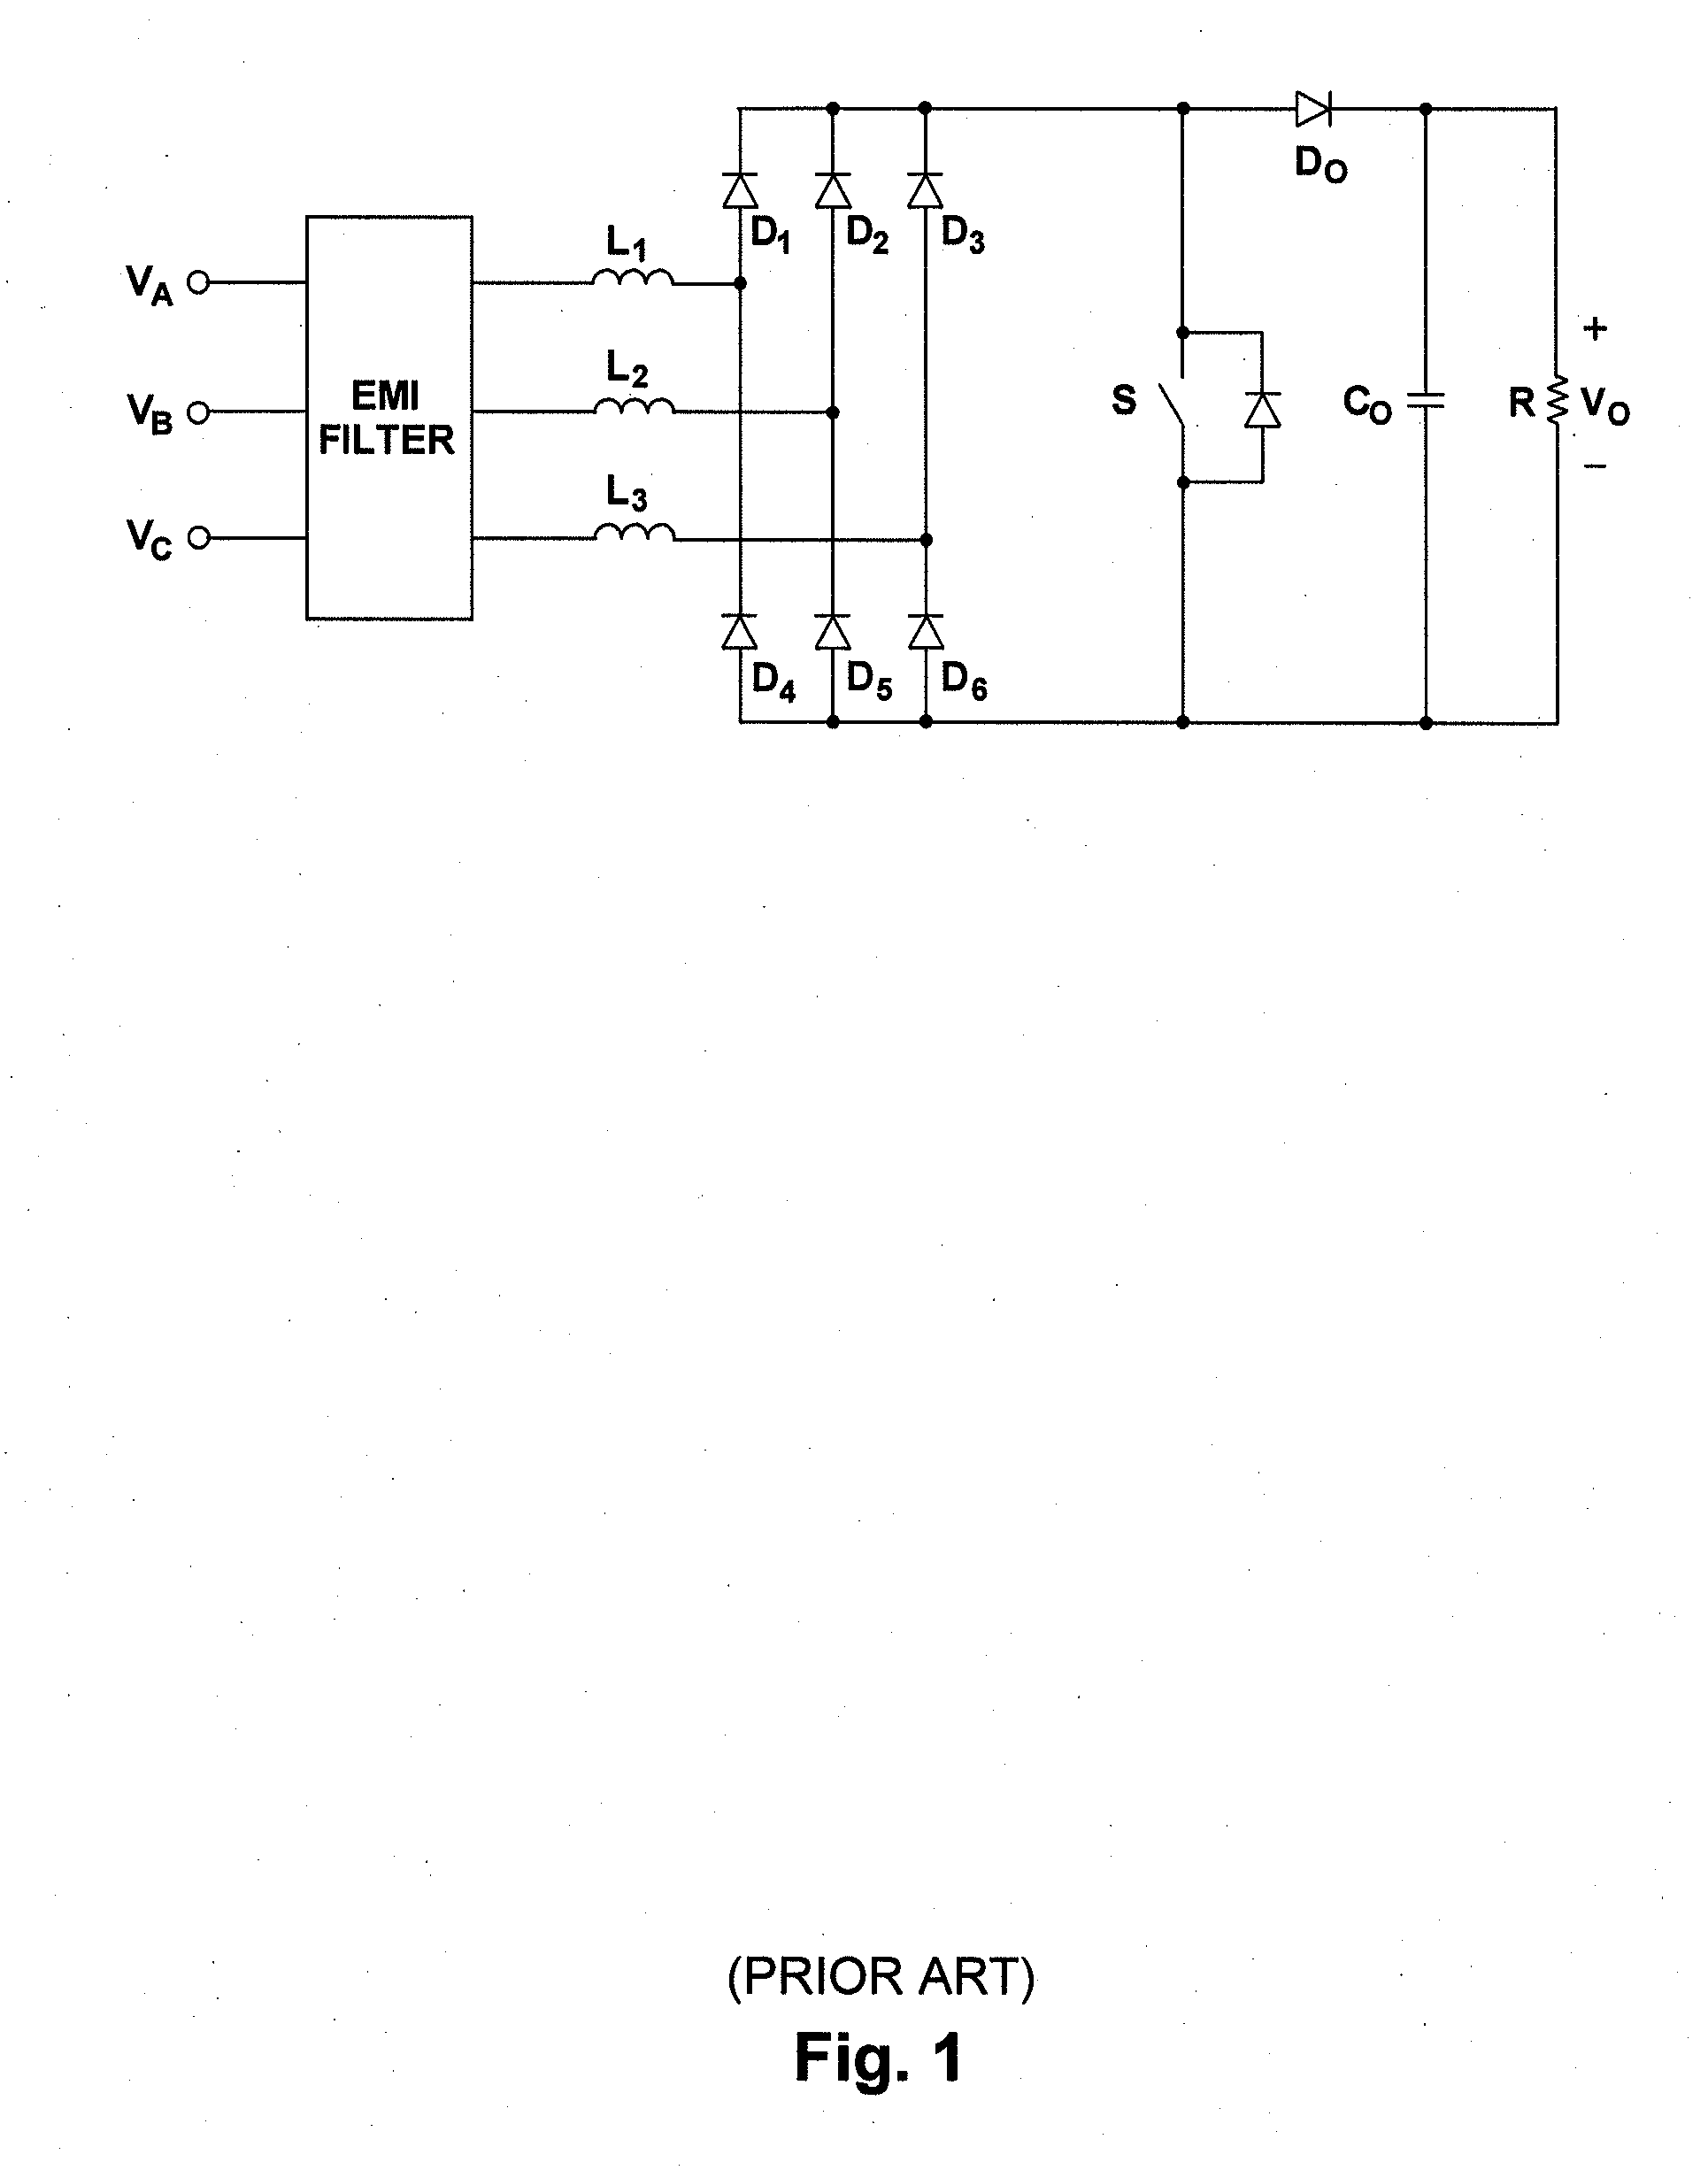 Three-phase soft-switched pfc rectifiers